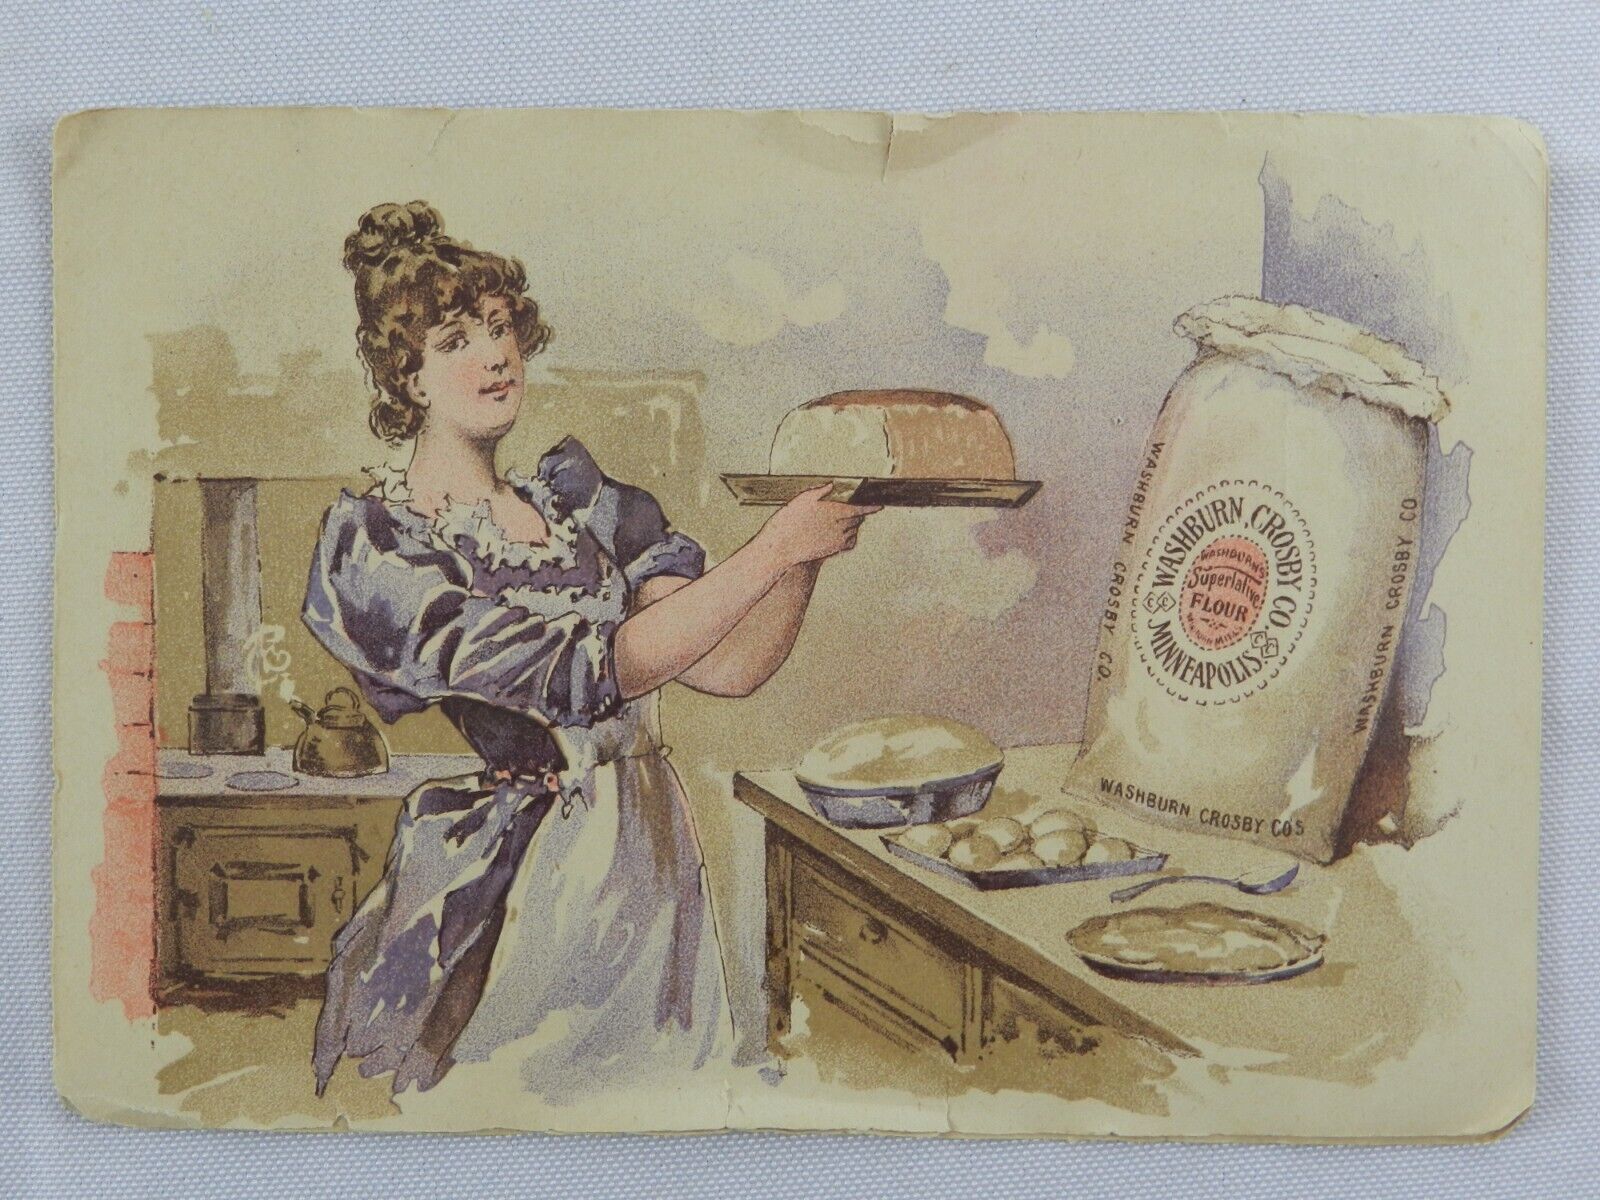 Young Woman in Victorian Kitchen Bakes - Washburn Crosby Co. Vintage Photograph